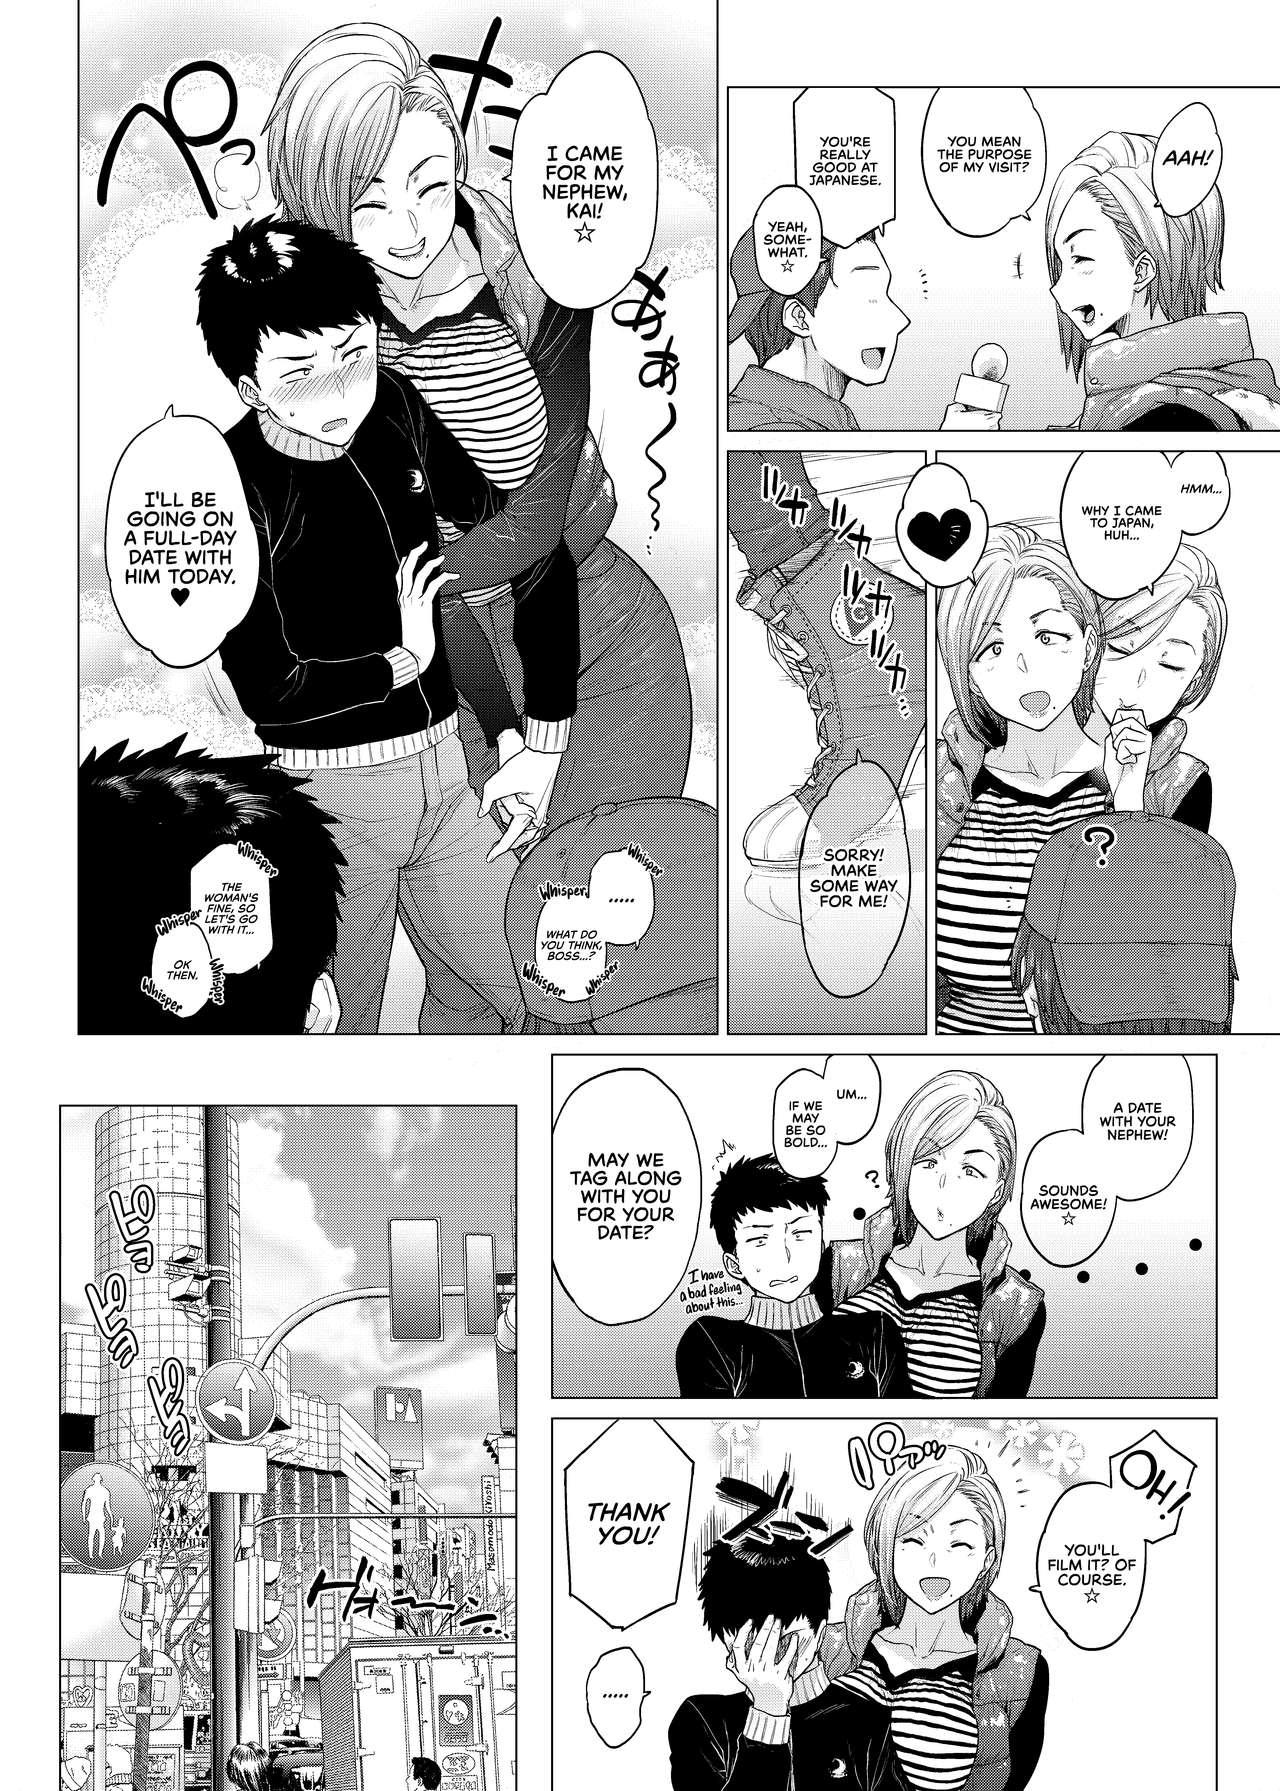 Grandma Why did you オーバー the sea? | Why did you cross over the sea? - Original Perfect Body - Page 5